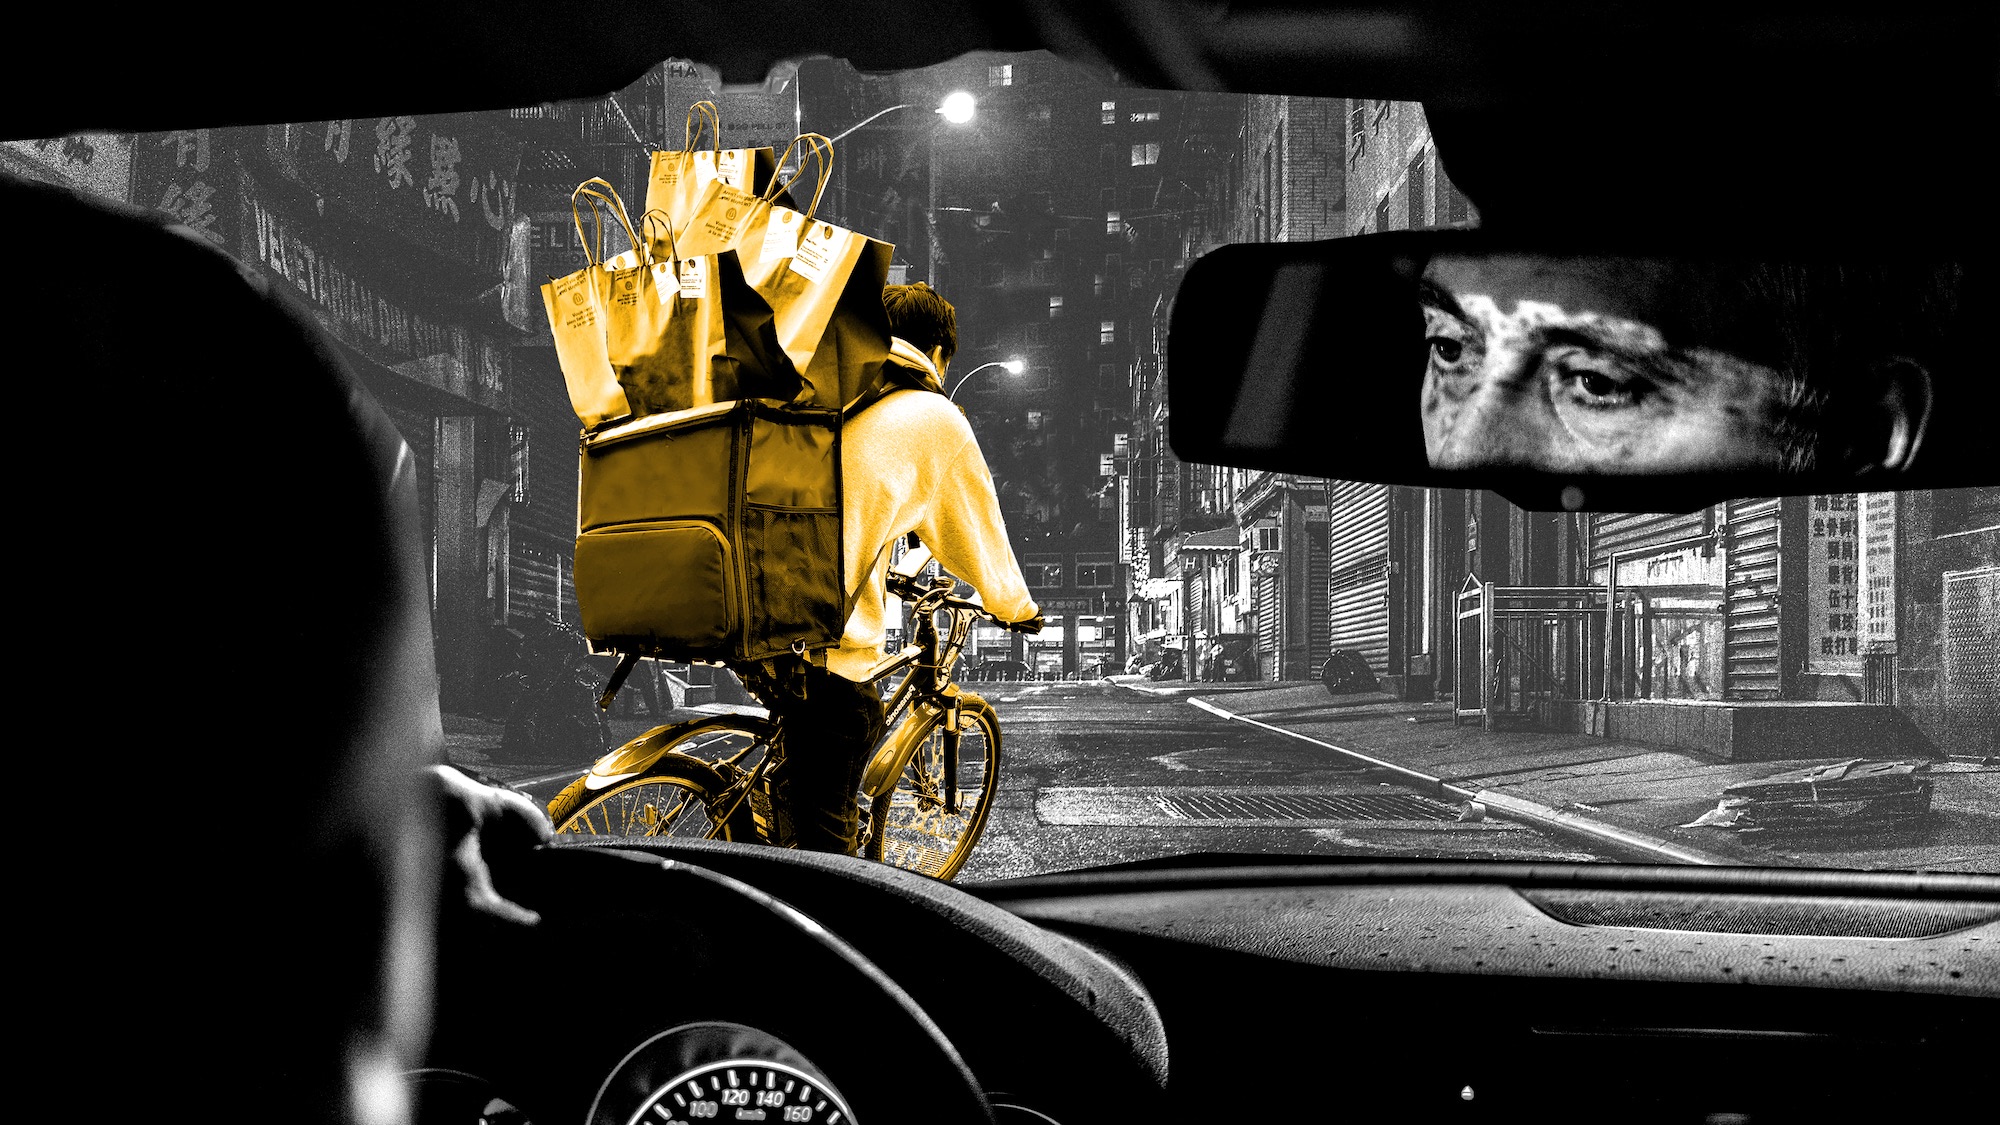 Illustration: back seat of a car looking through the windscreen. A gig worker with package deliveries is in front of the car.